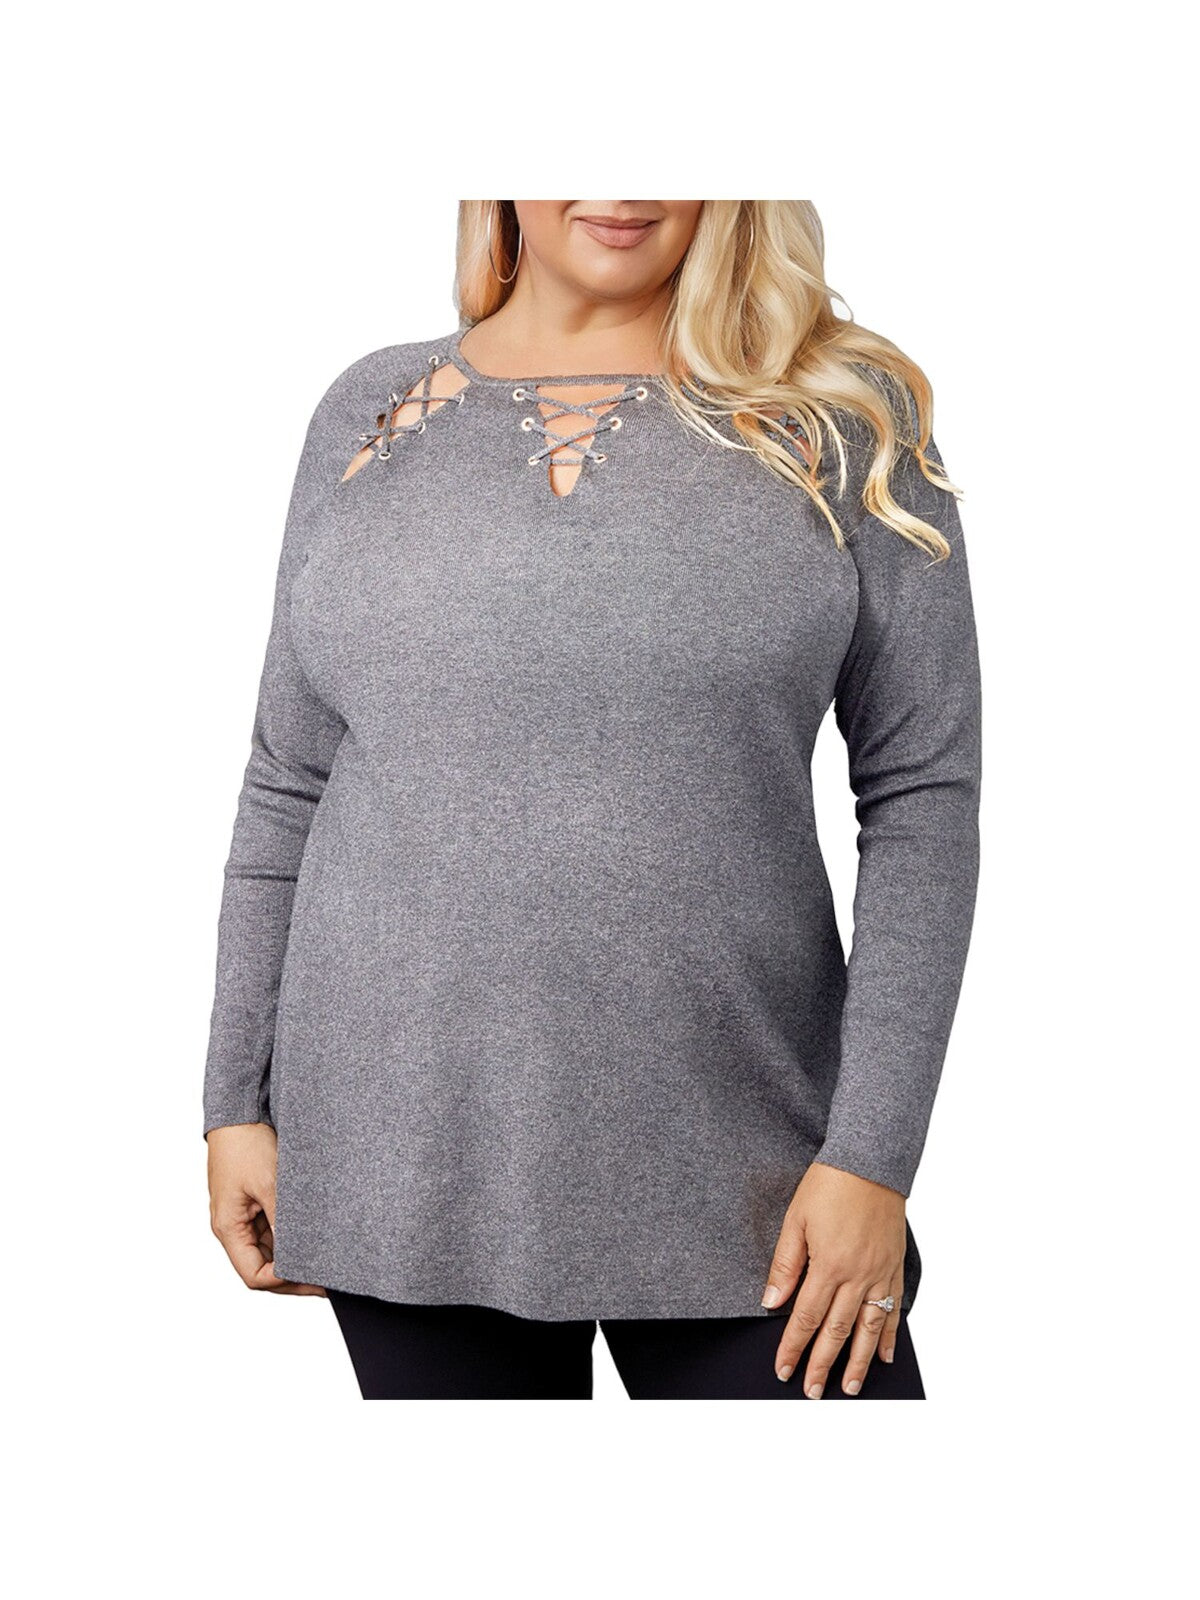 BELLDINI Womens Gray Stretch Ribbed Lace Up Cut Outs Long Sleeve Round Neck Wear To Work Sweater Plus 2X